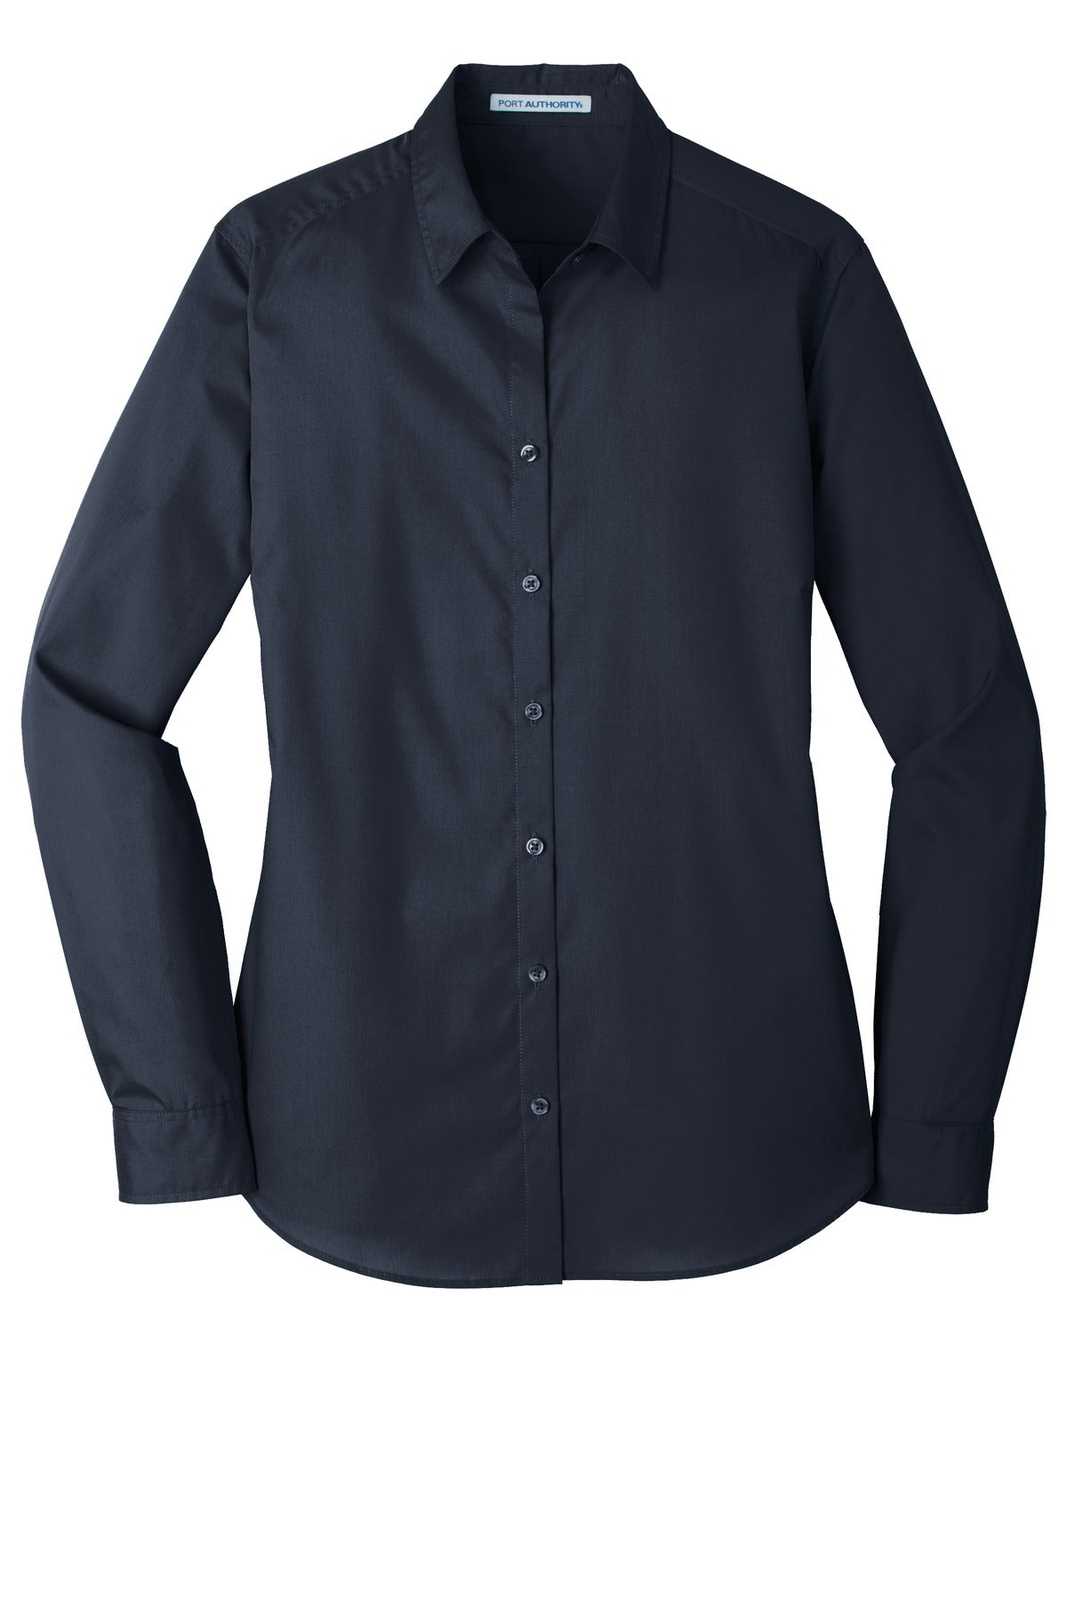 Port Authority LW100 Ladies Long Sleeve Carefree Poplin Shirt - River Blue Navy - HIT a Double - 5